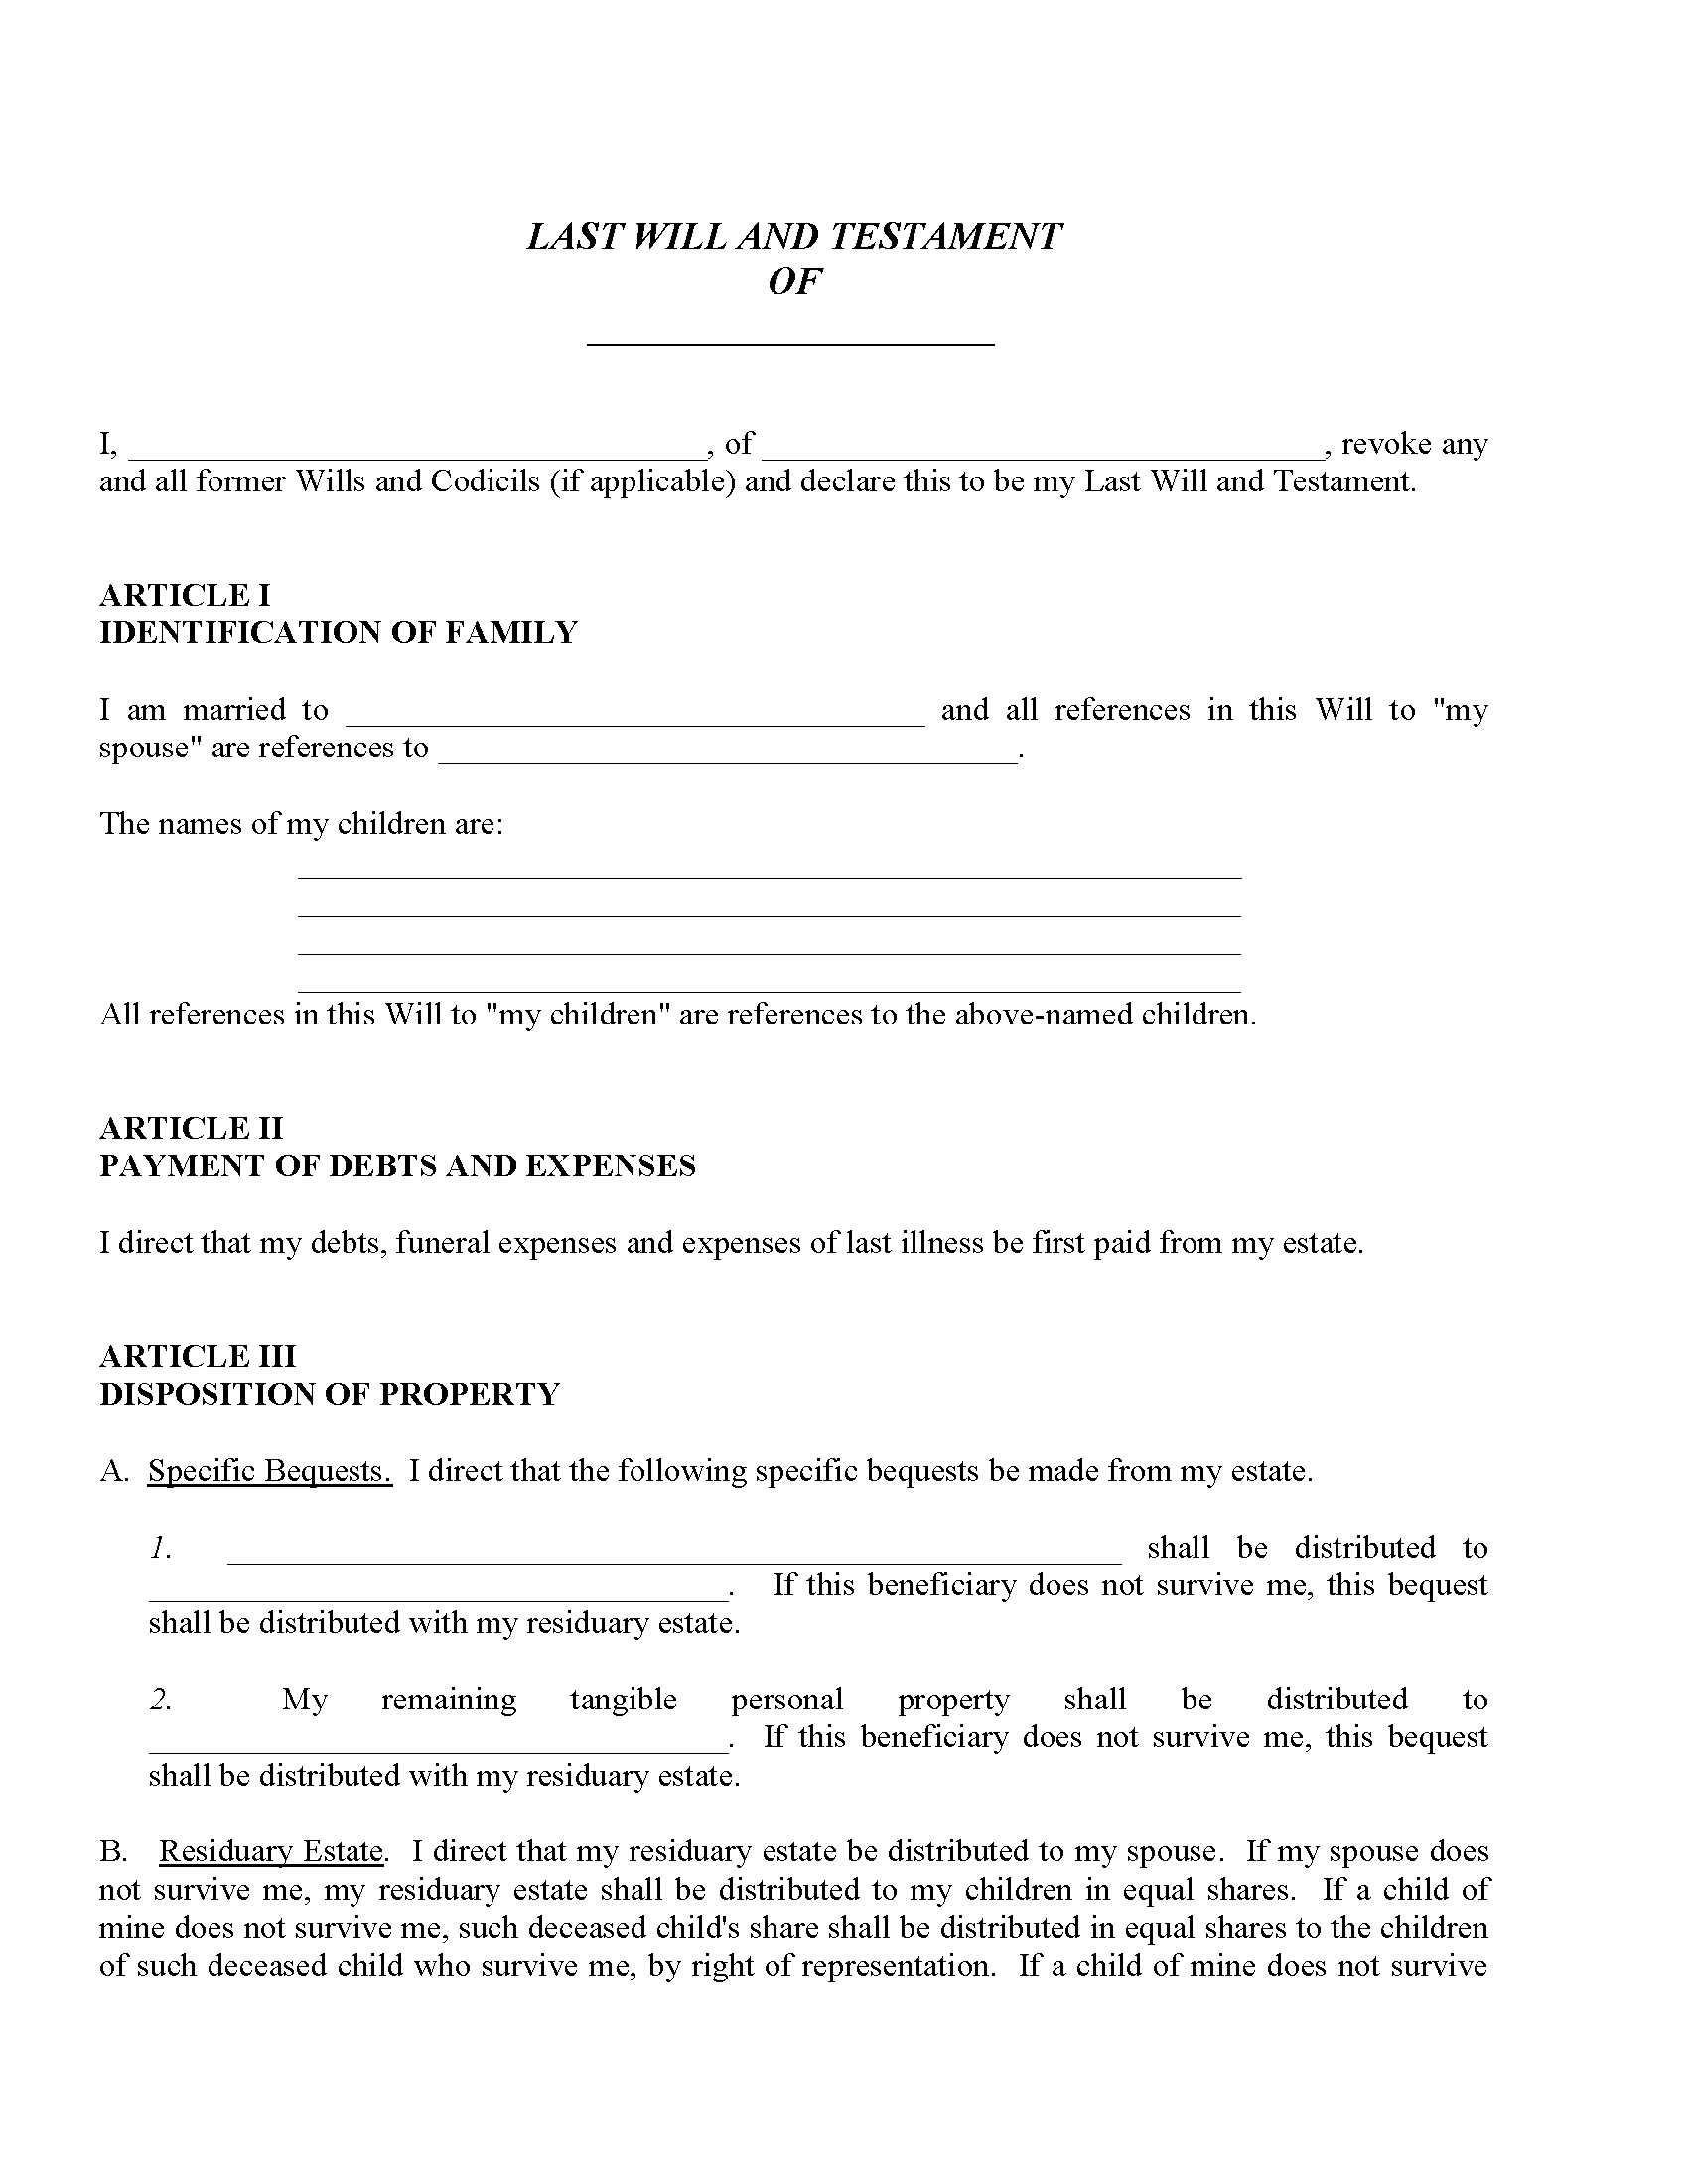 Ohio Last Will and Testament - Free Printable Legal Forms